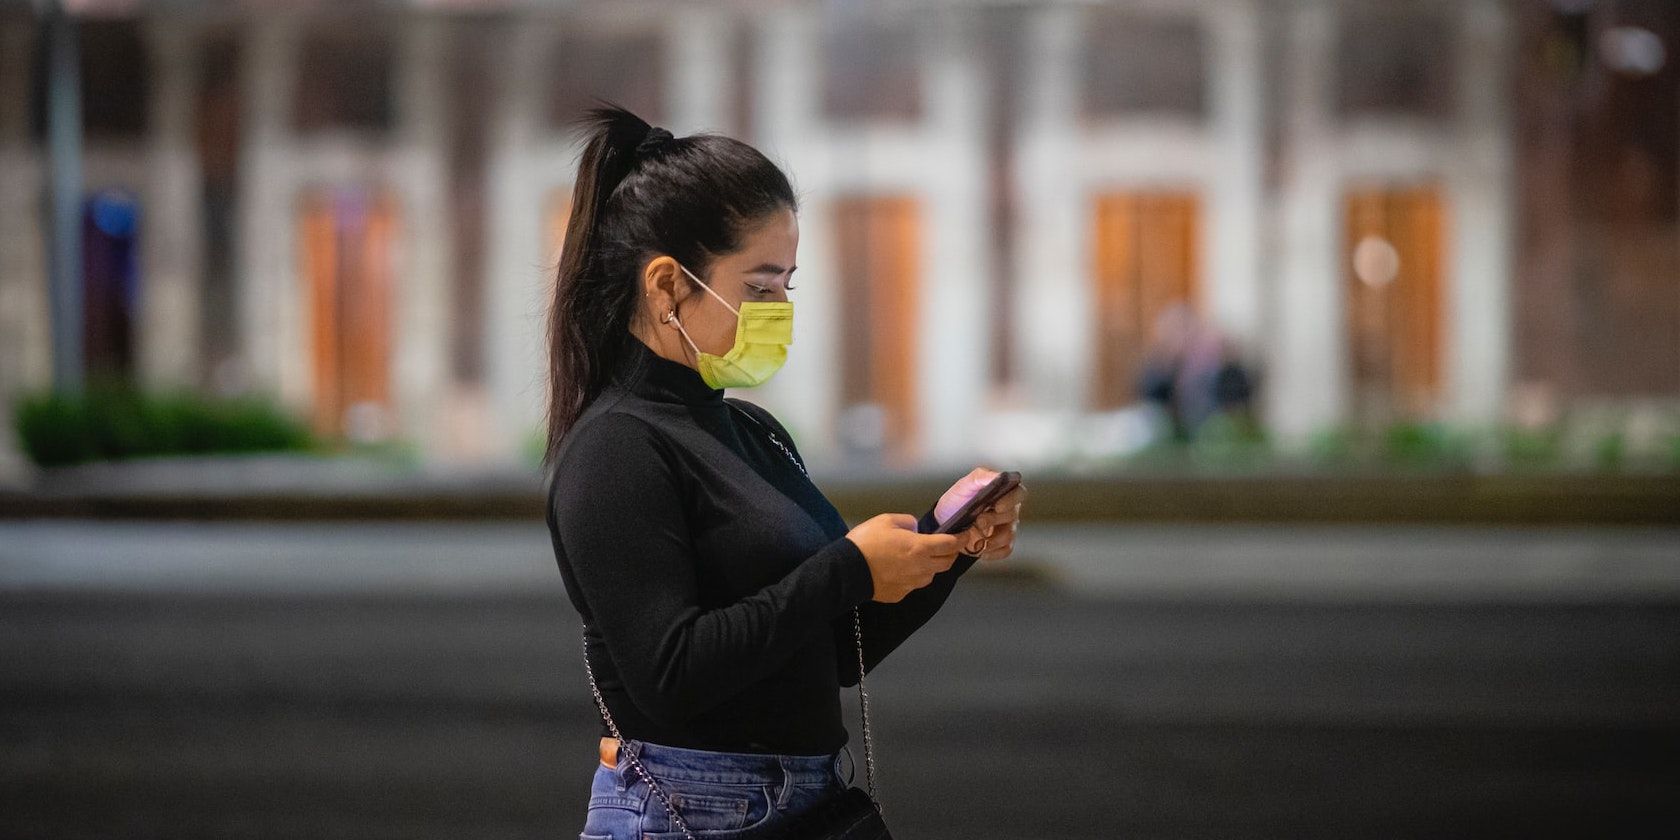 Lady Using Mobile Phone Outside